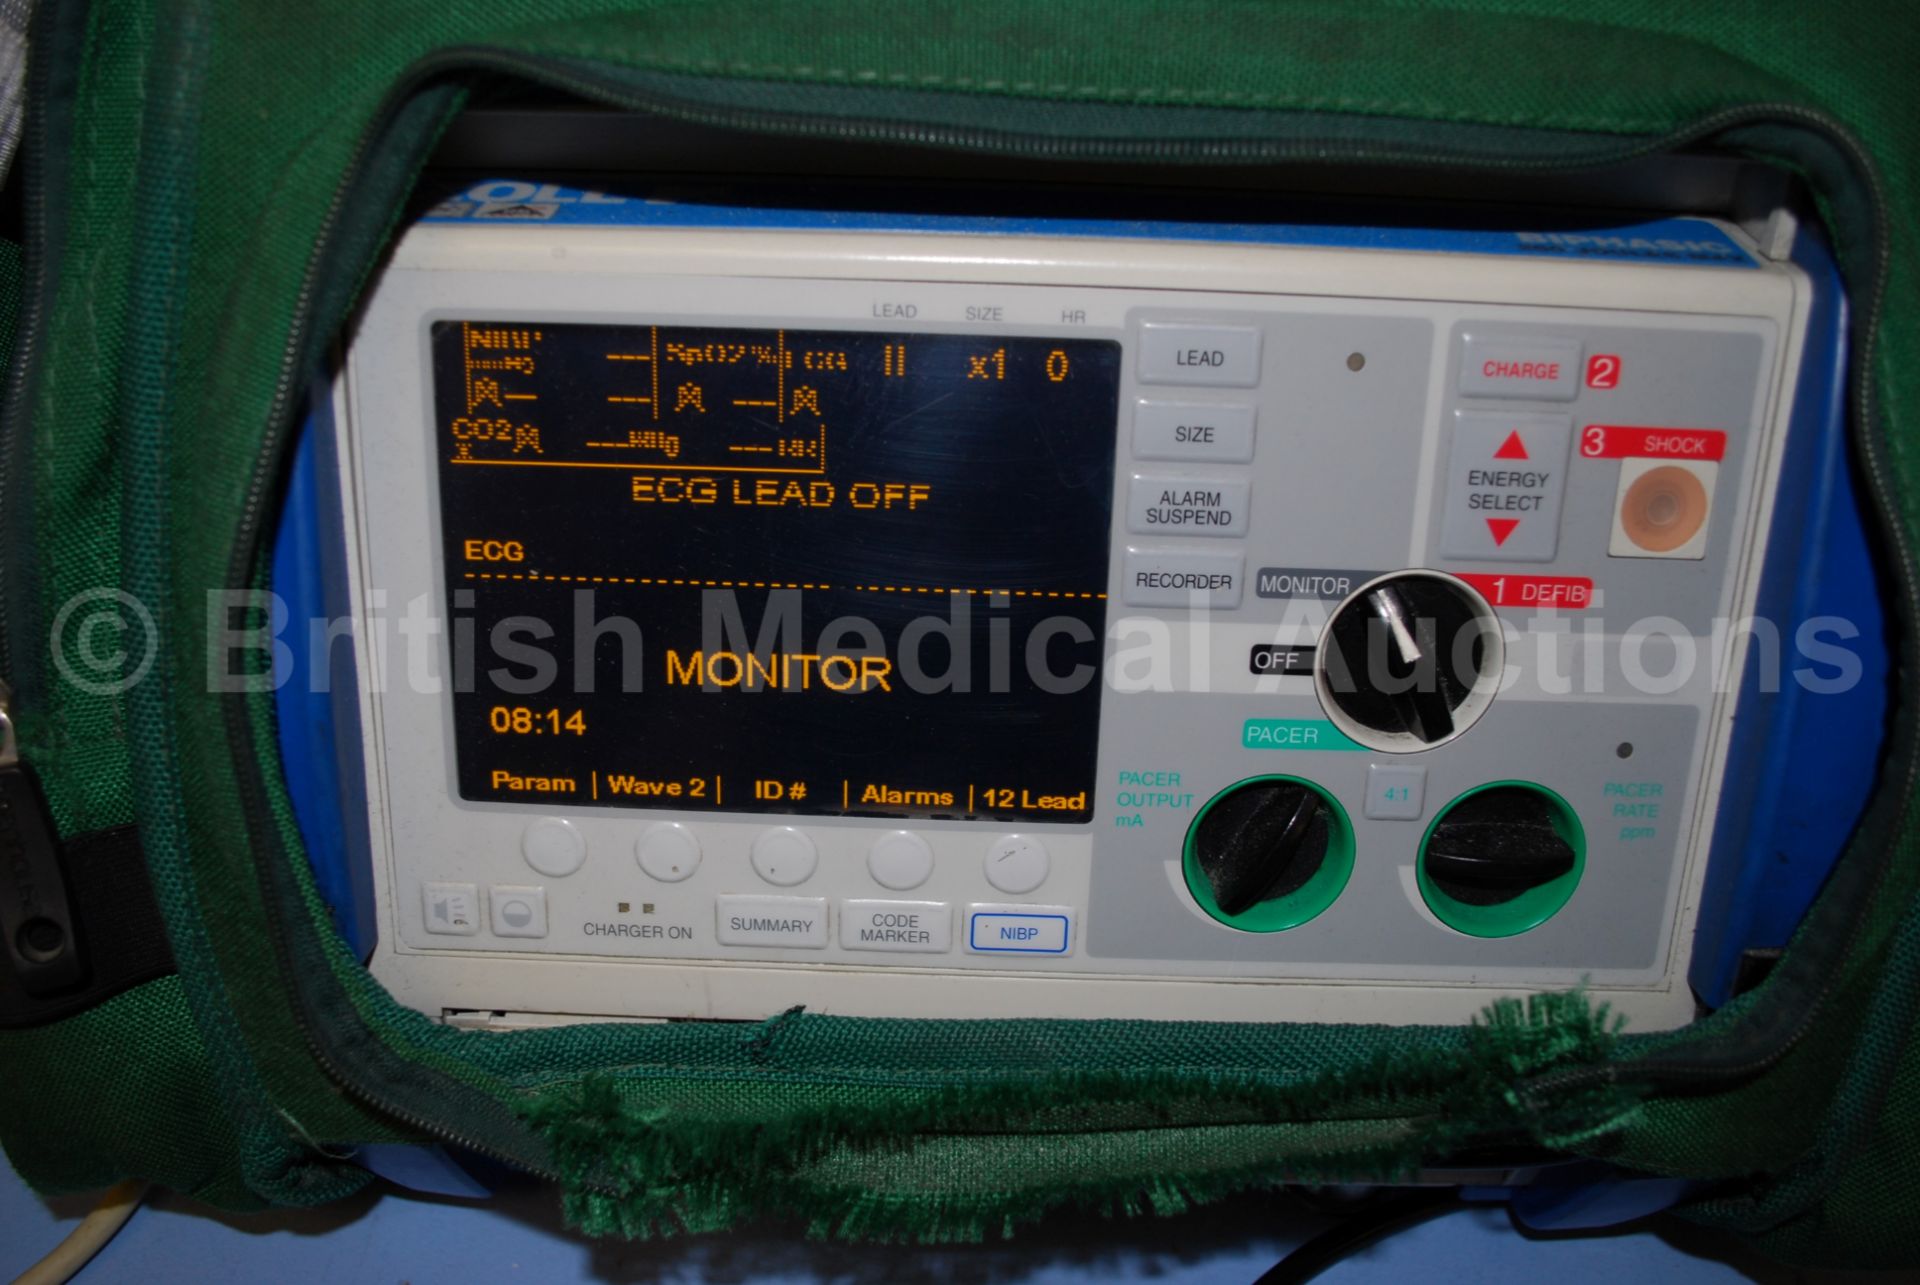 Zoll M Series Biphasic 200 Joules Max Defibrillato - Image 4 of 6